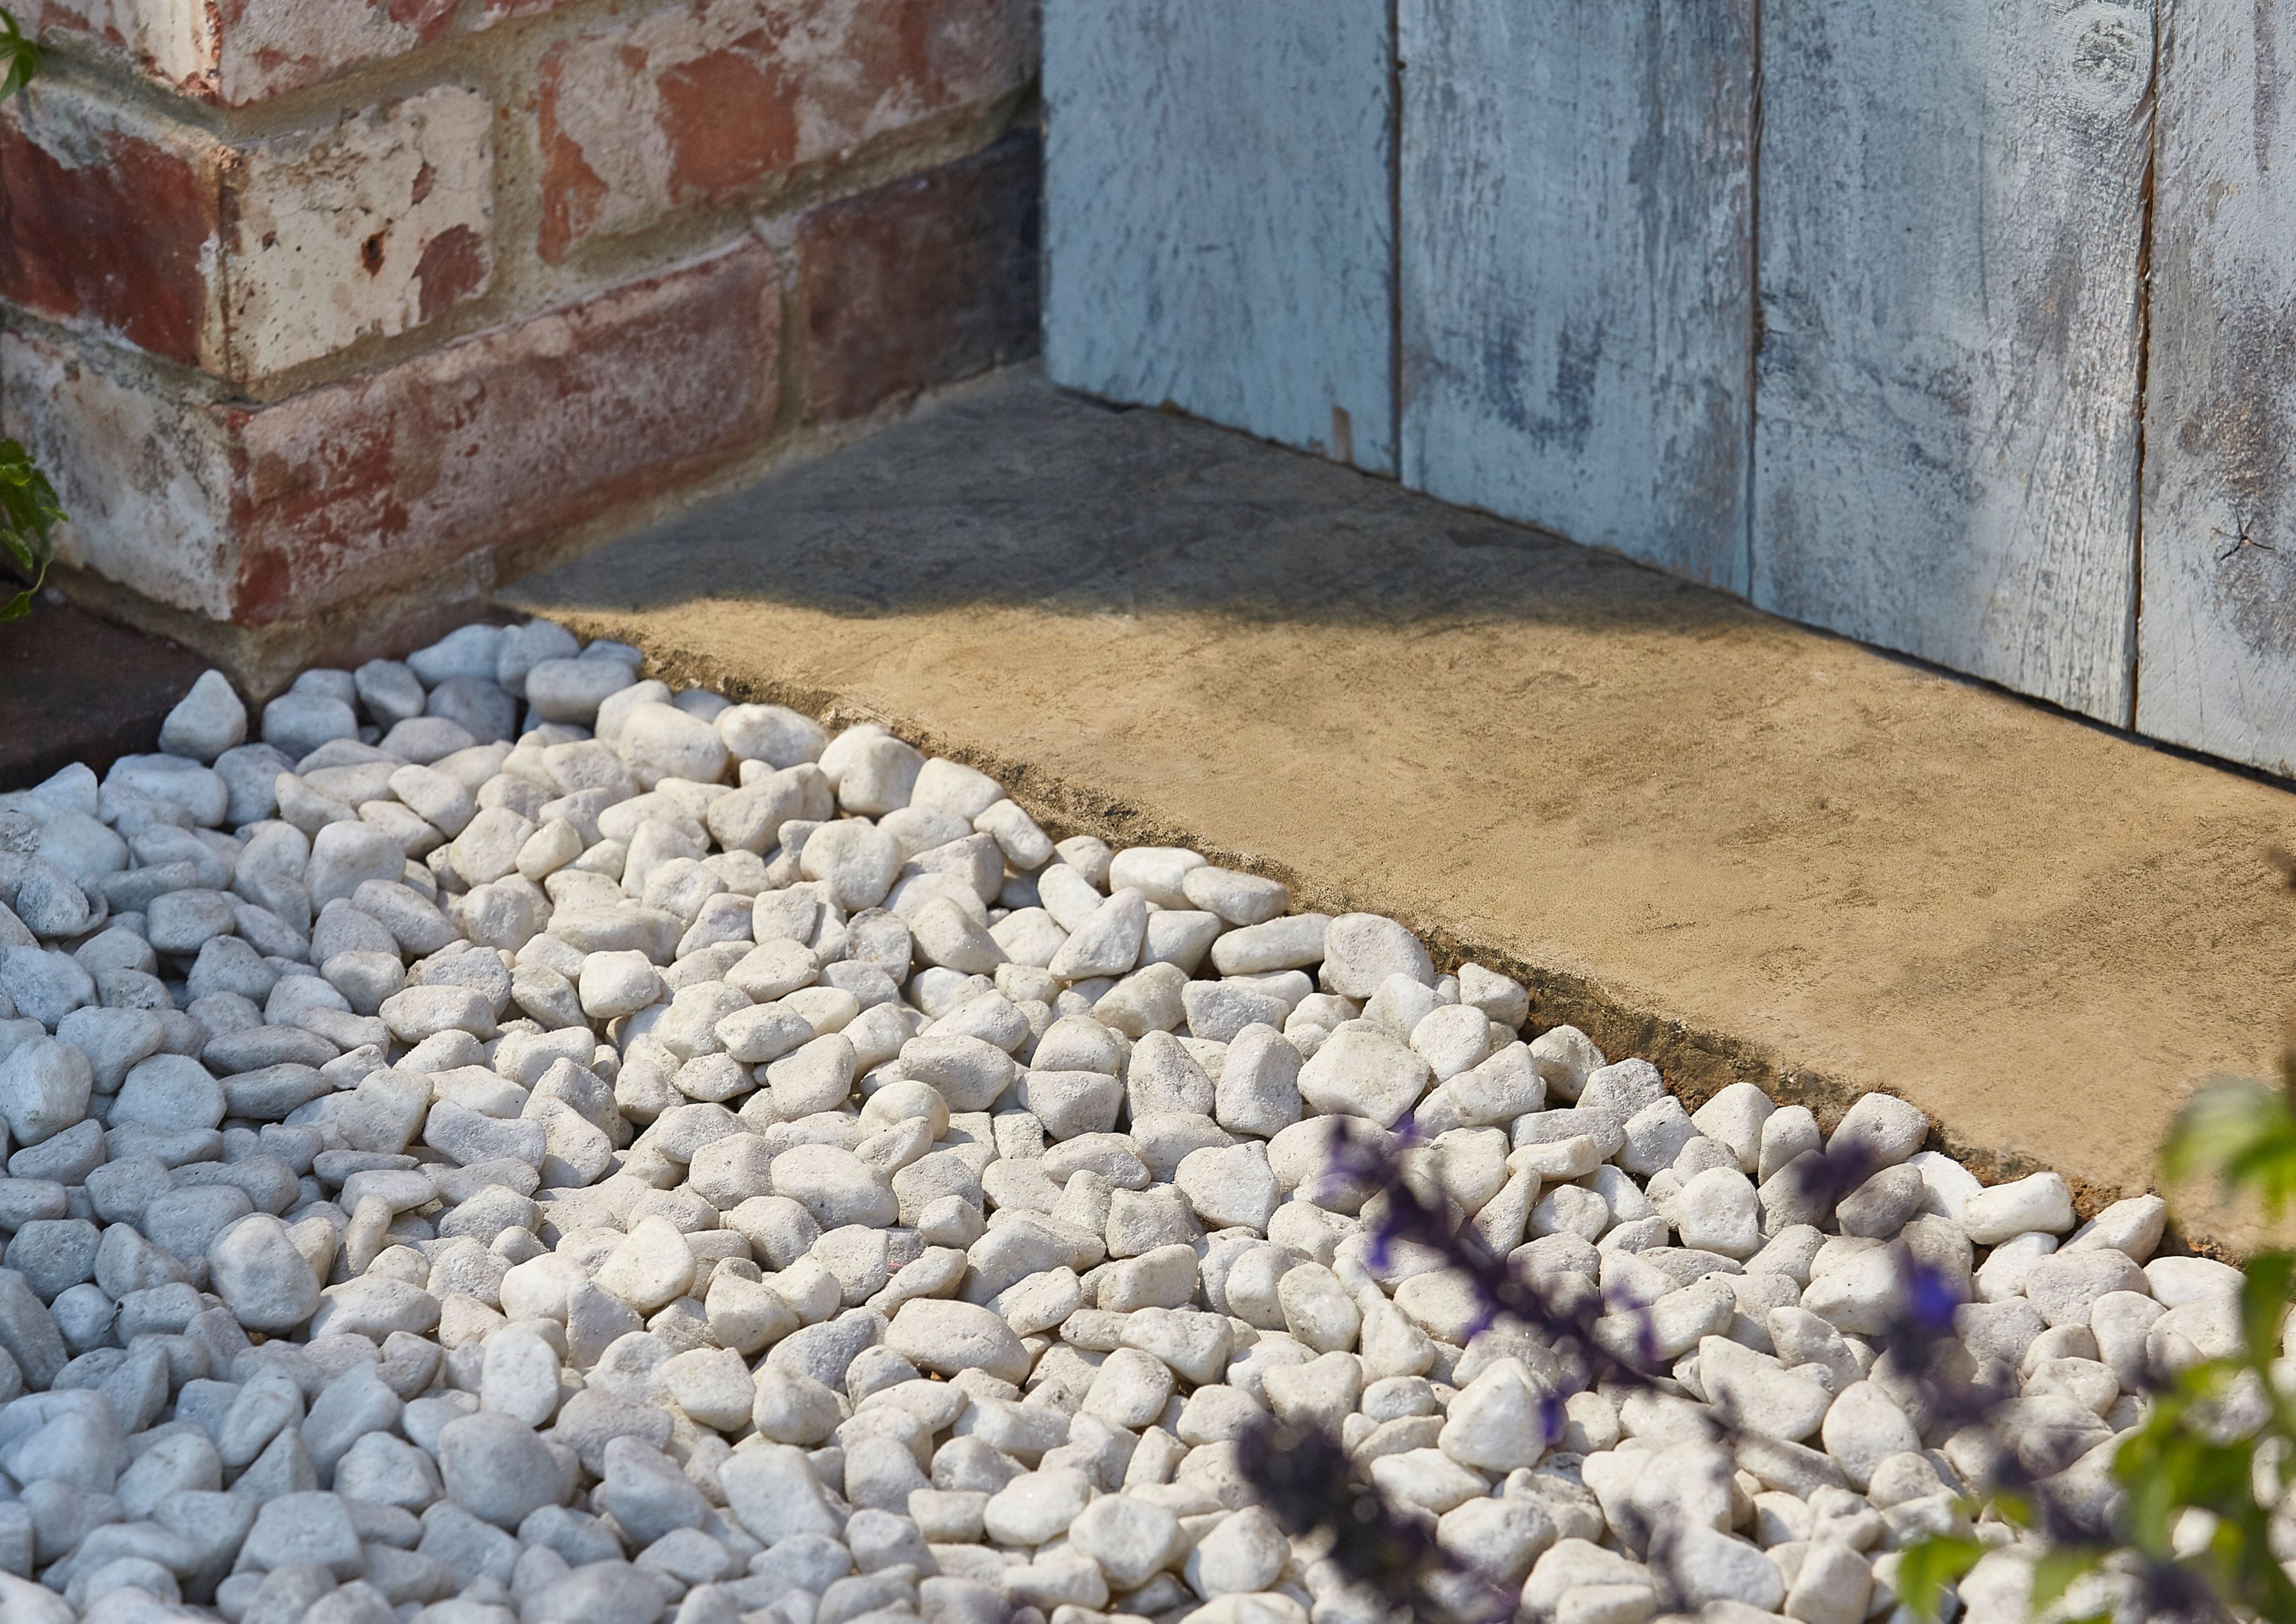 Blooma White 15-25mm Rounded pebbles